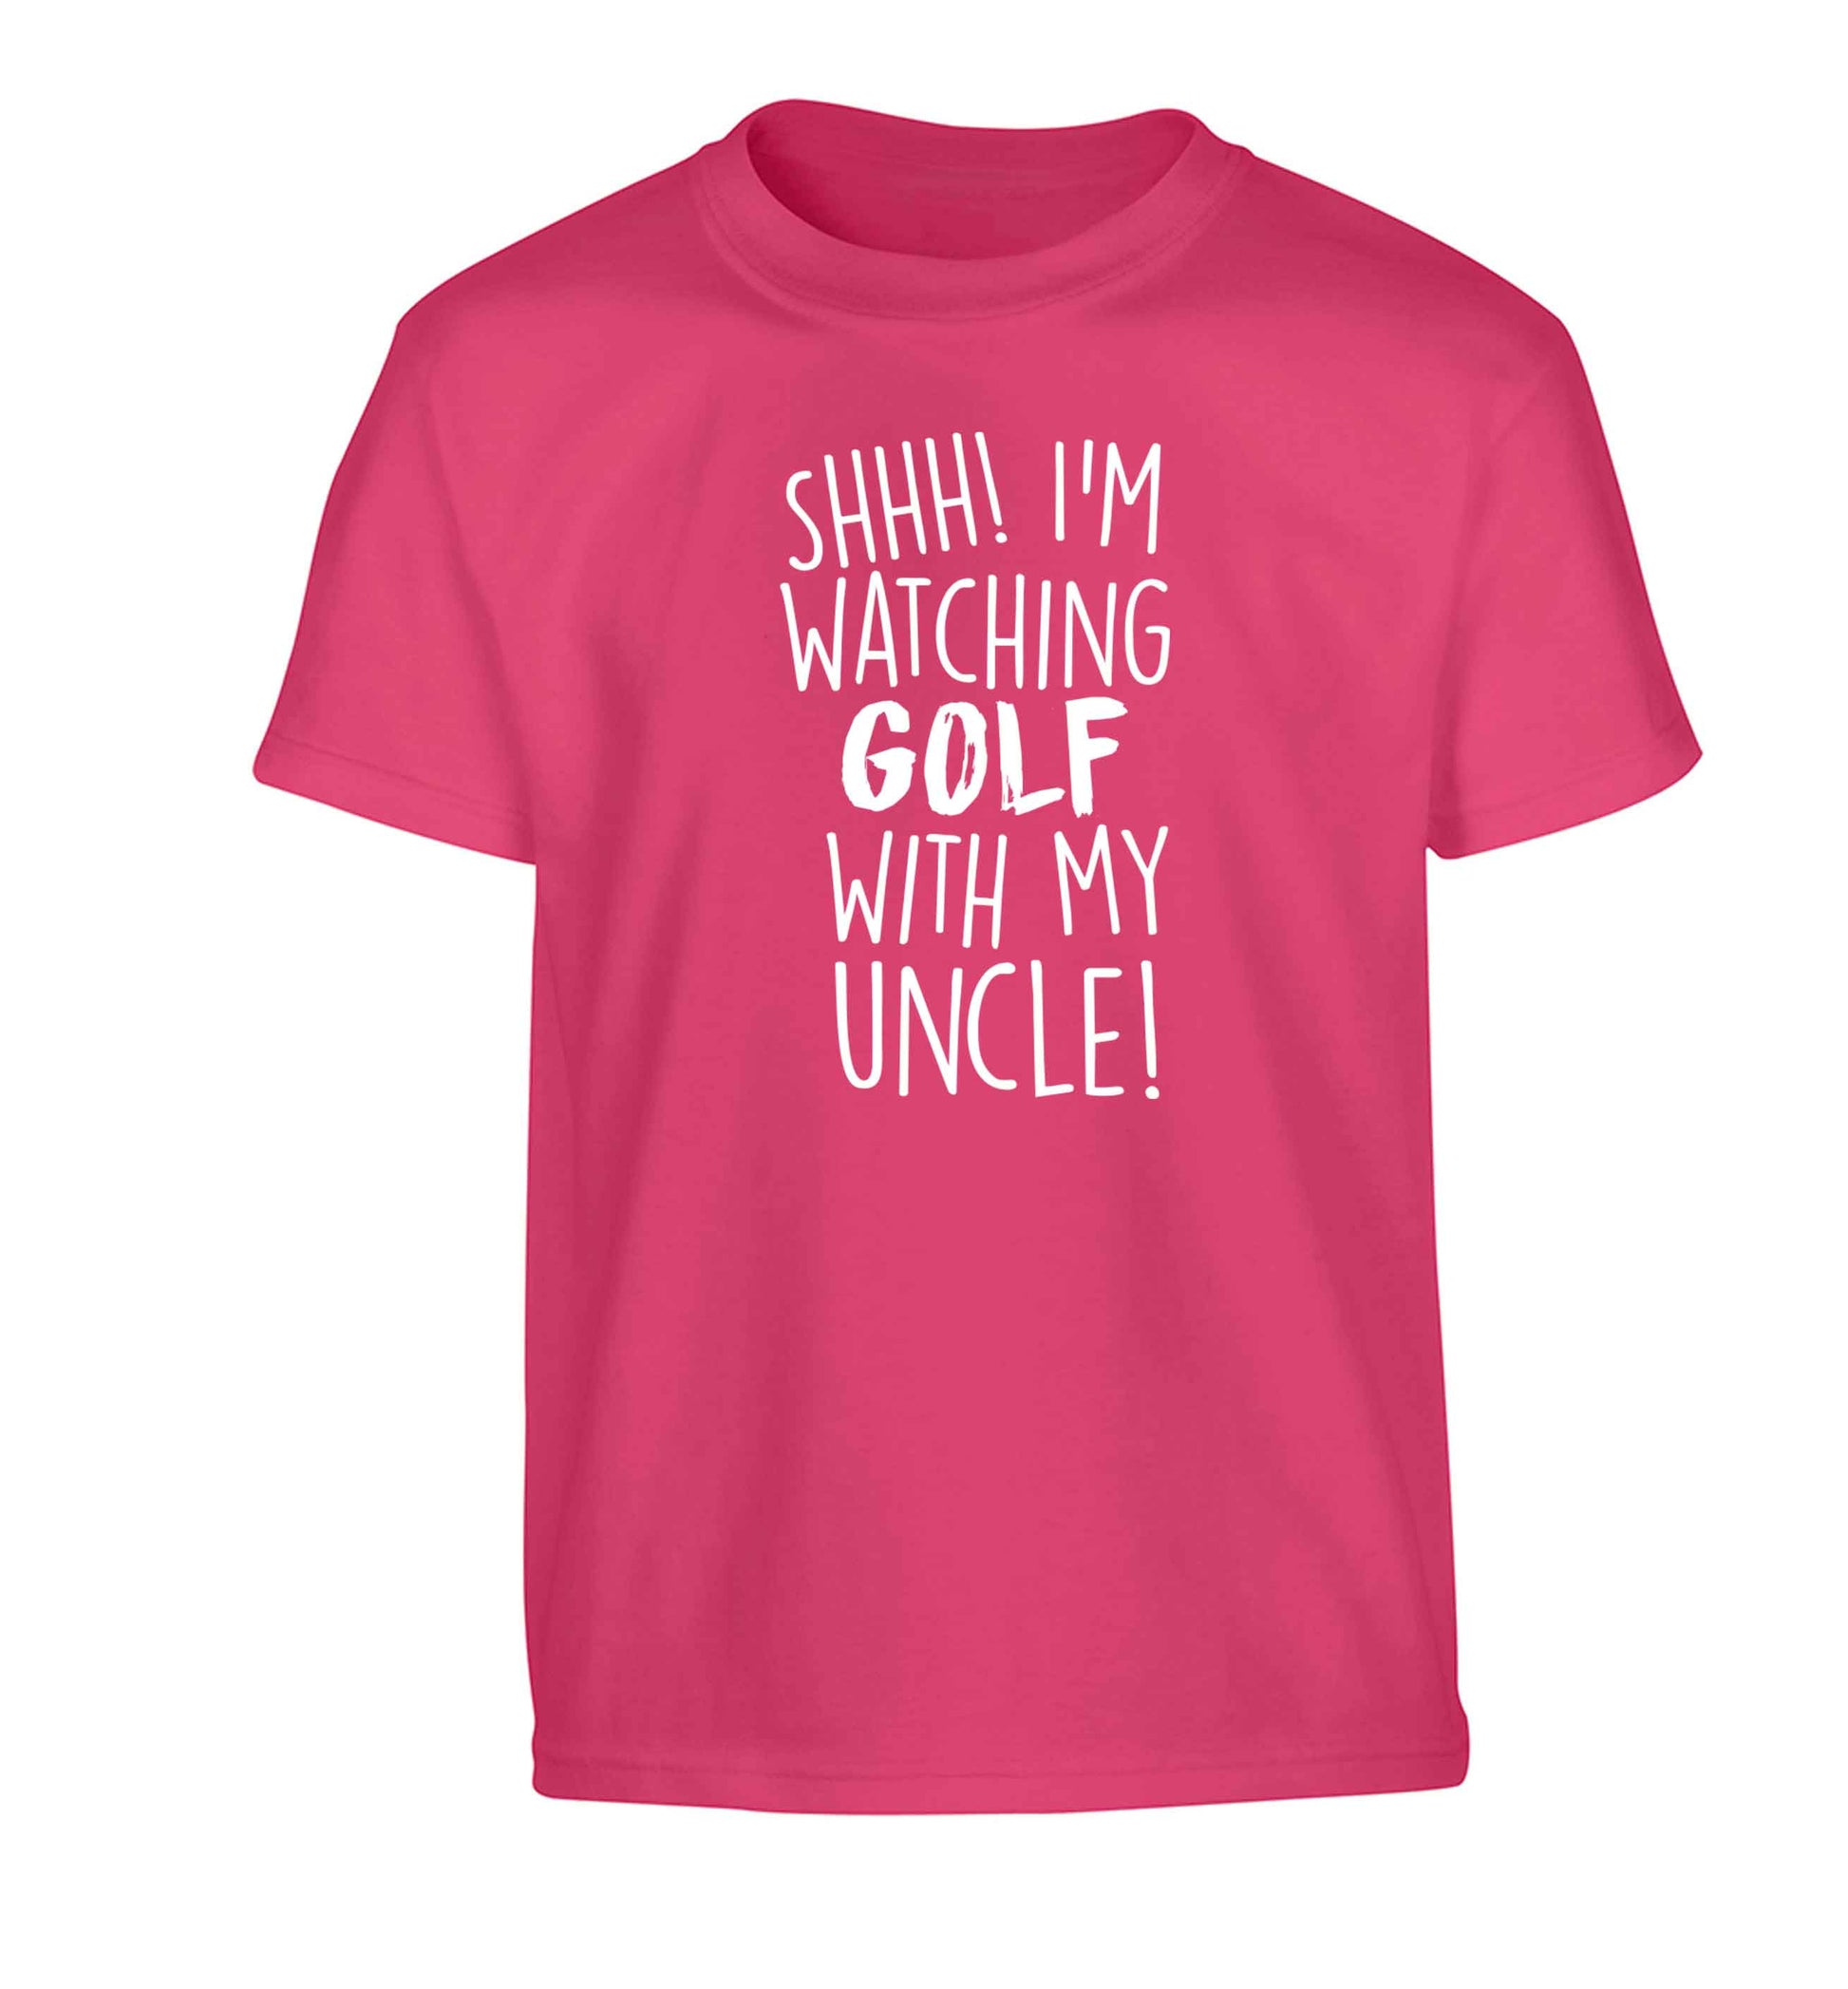 Shh I'm watching golf with my uncle Children's pink Tshirt 12-13 Years